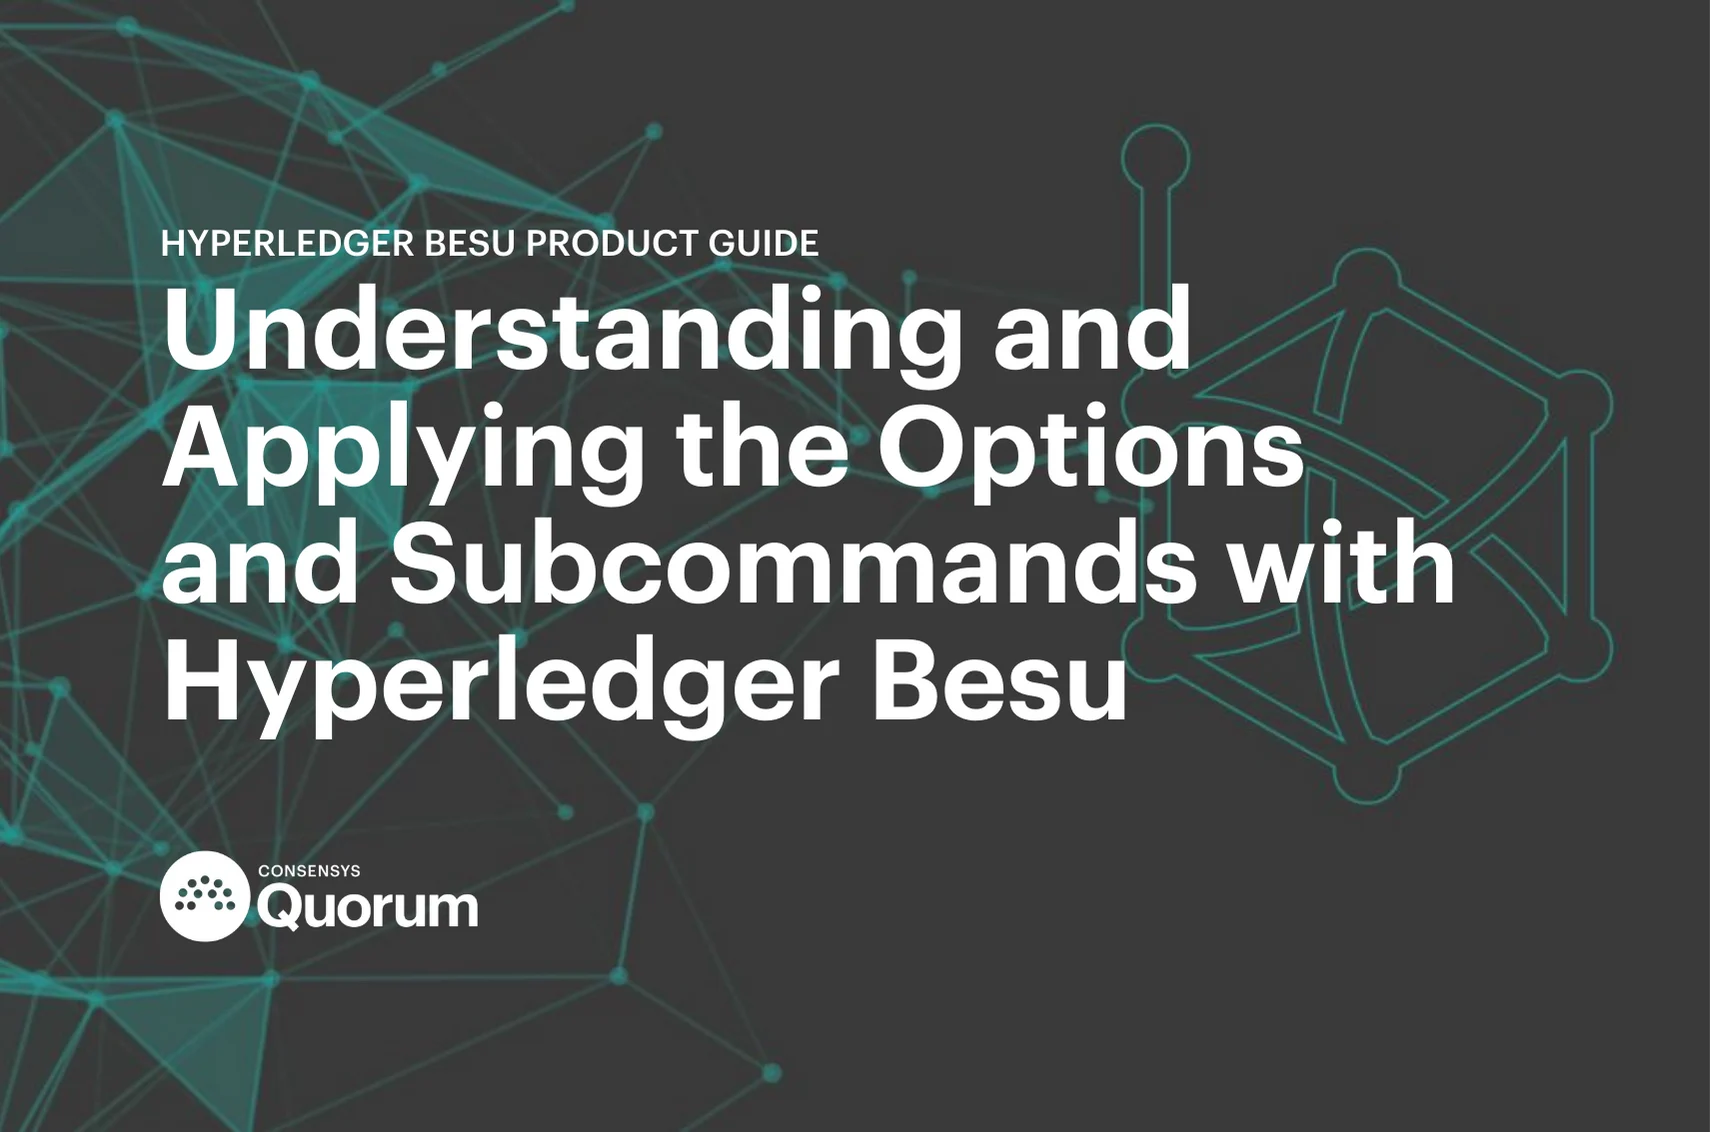 Image: Understanding and Applying the Options and Subcommands with Hyperledger Besu